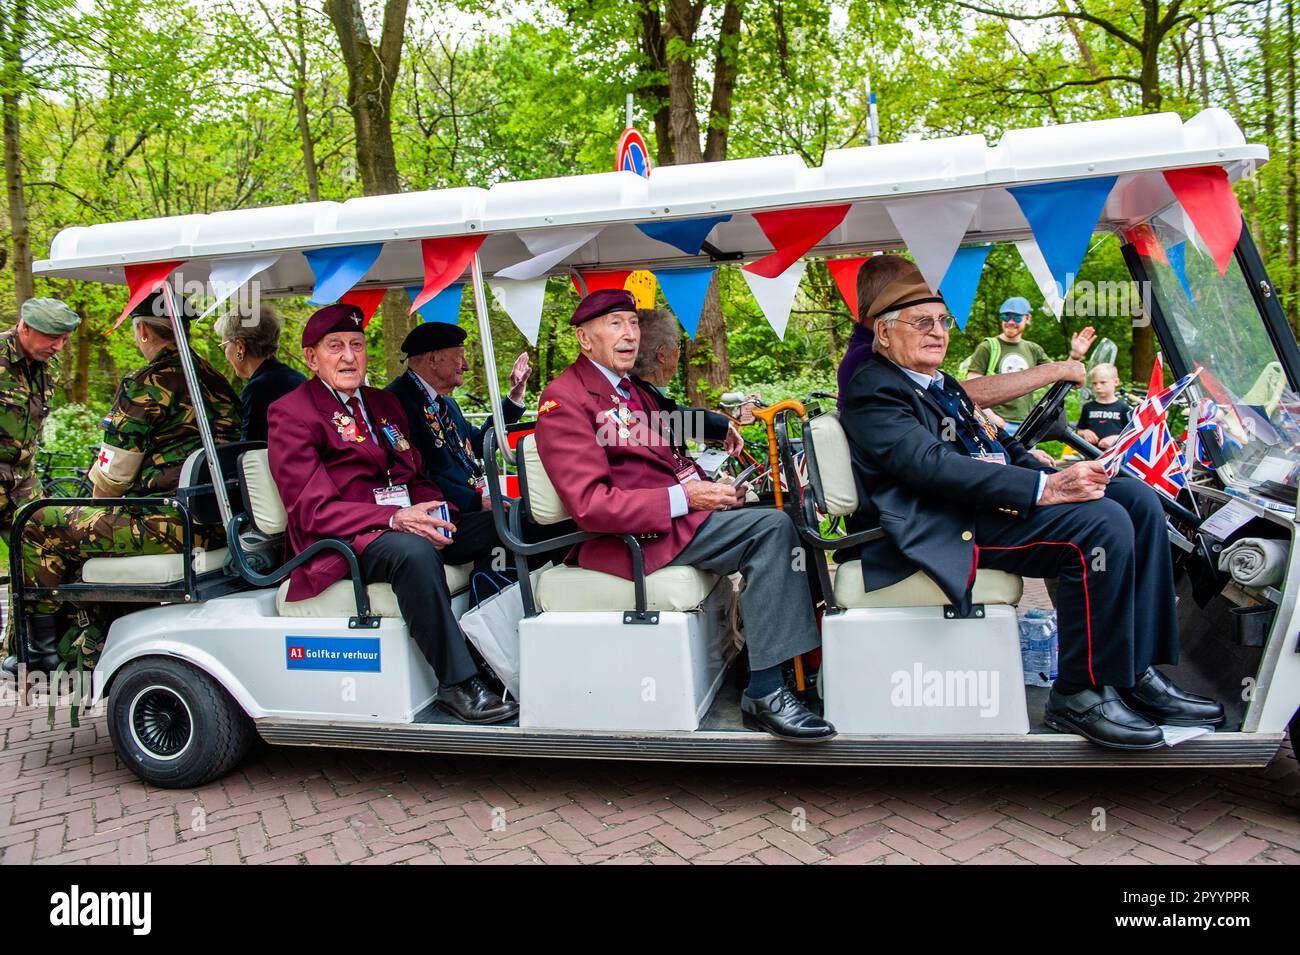 WWII English veterans are seen arriving in special cars. Wageningen, also known as the 'City of Liberation', is especially connected to the remembrance days here on 4 and 5 May, as the capitulation which ended World War II in the Netherlands was signed in the city. During Liberation Day, The Liberation Parade, or 'Bevrijdingsdefilé' in Dutch is celebrated each year and reunites veterans and military successors to pay tribute to all those who gave their lives during WWII. This year also 17 British veterans were warmly welcomed, they arrived in British black cabs. Stock Photo